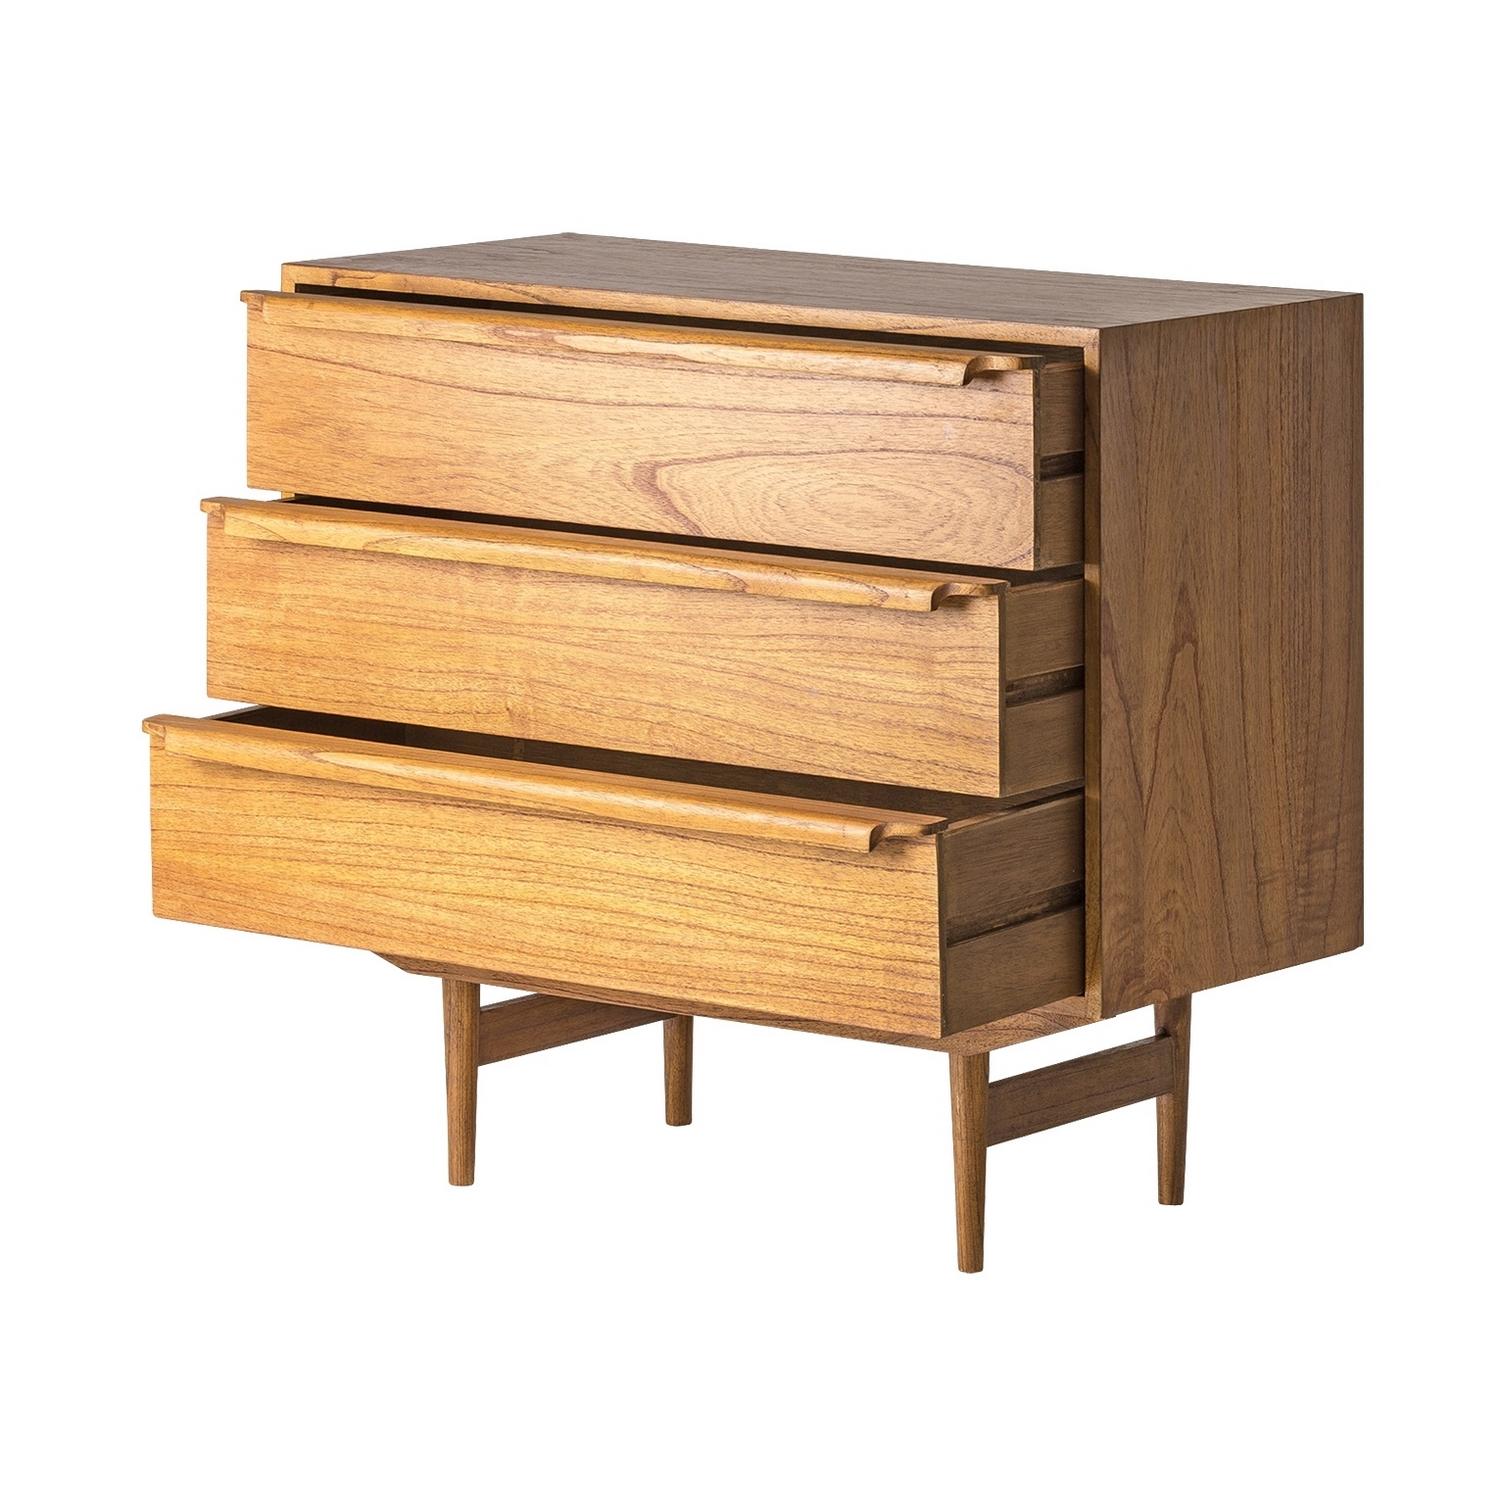 Scandinavian Modern Midcentury Style and Danish Design Wooden Chest of Drawers